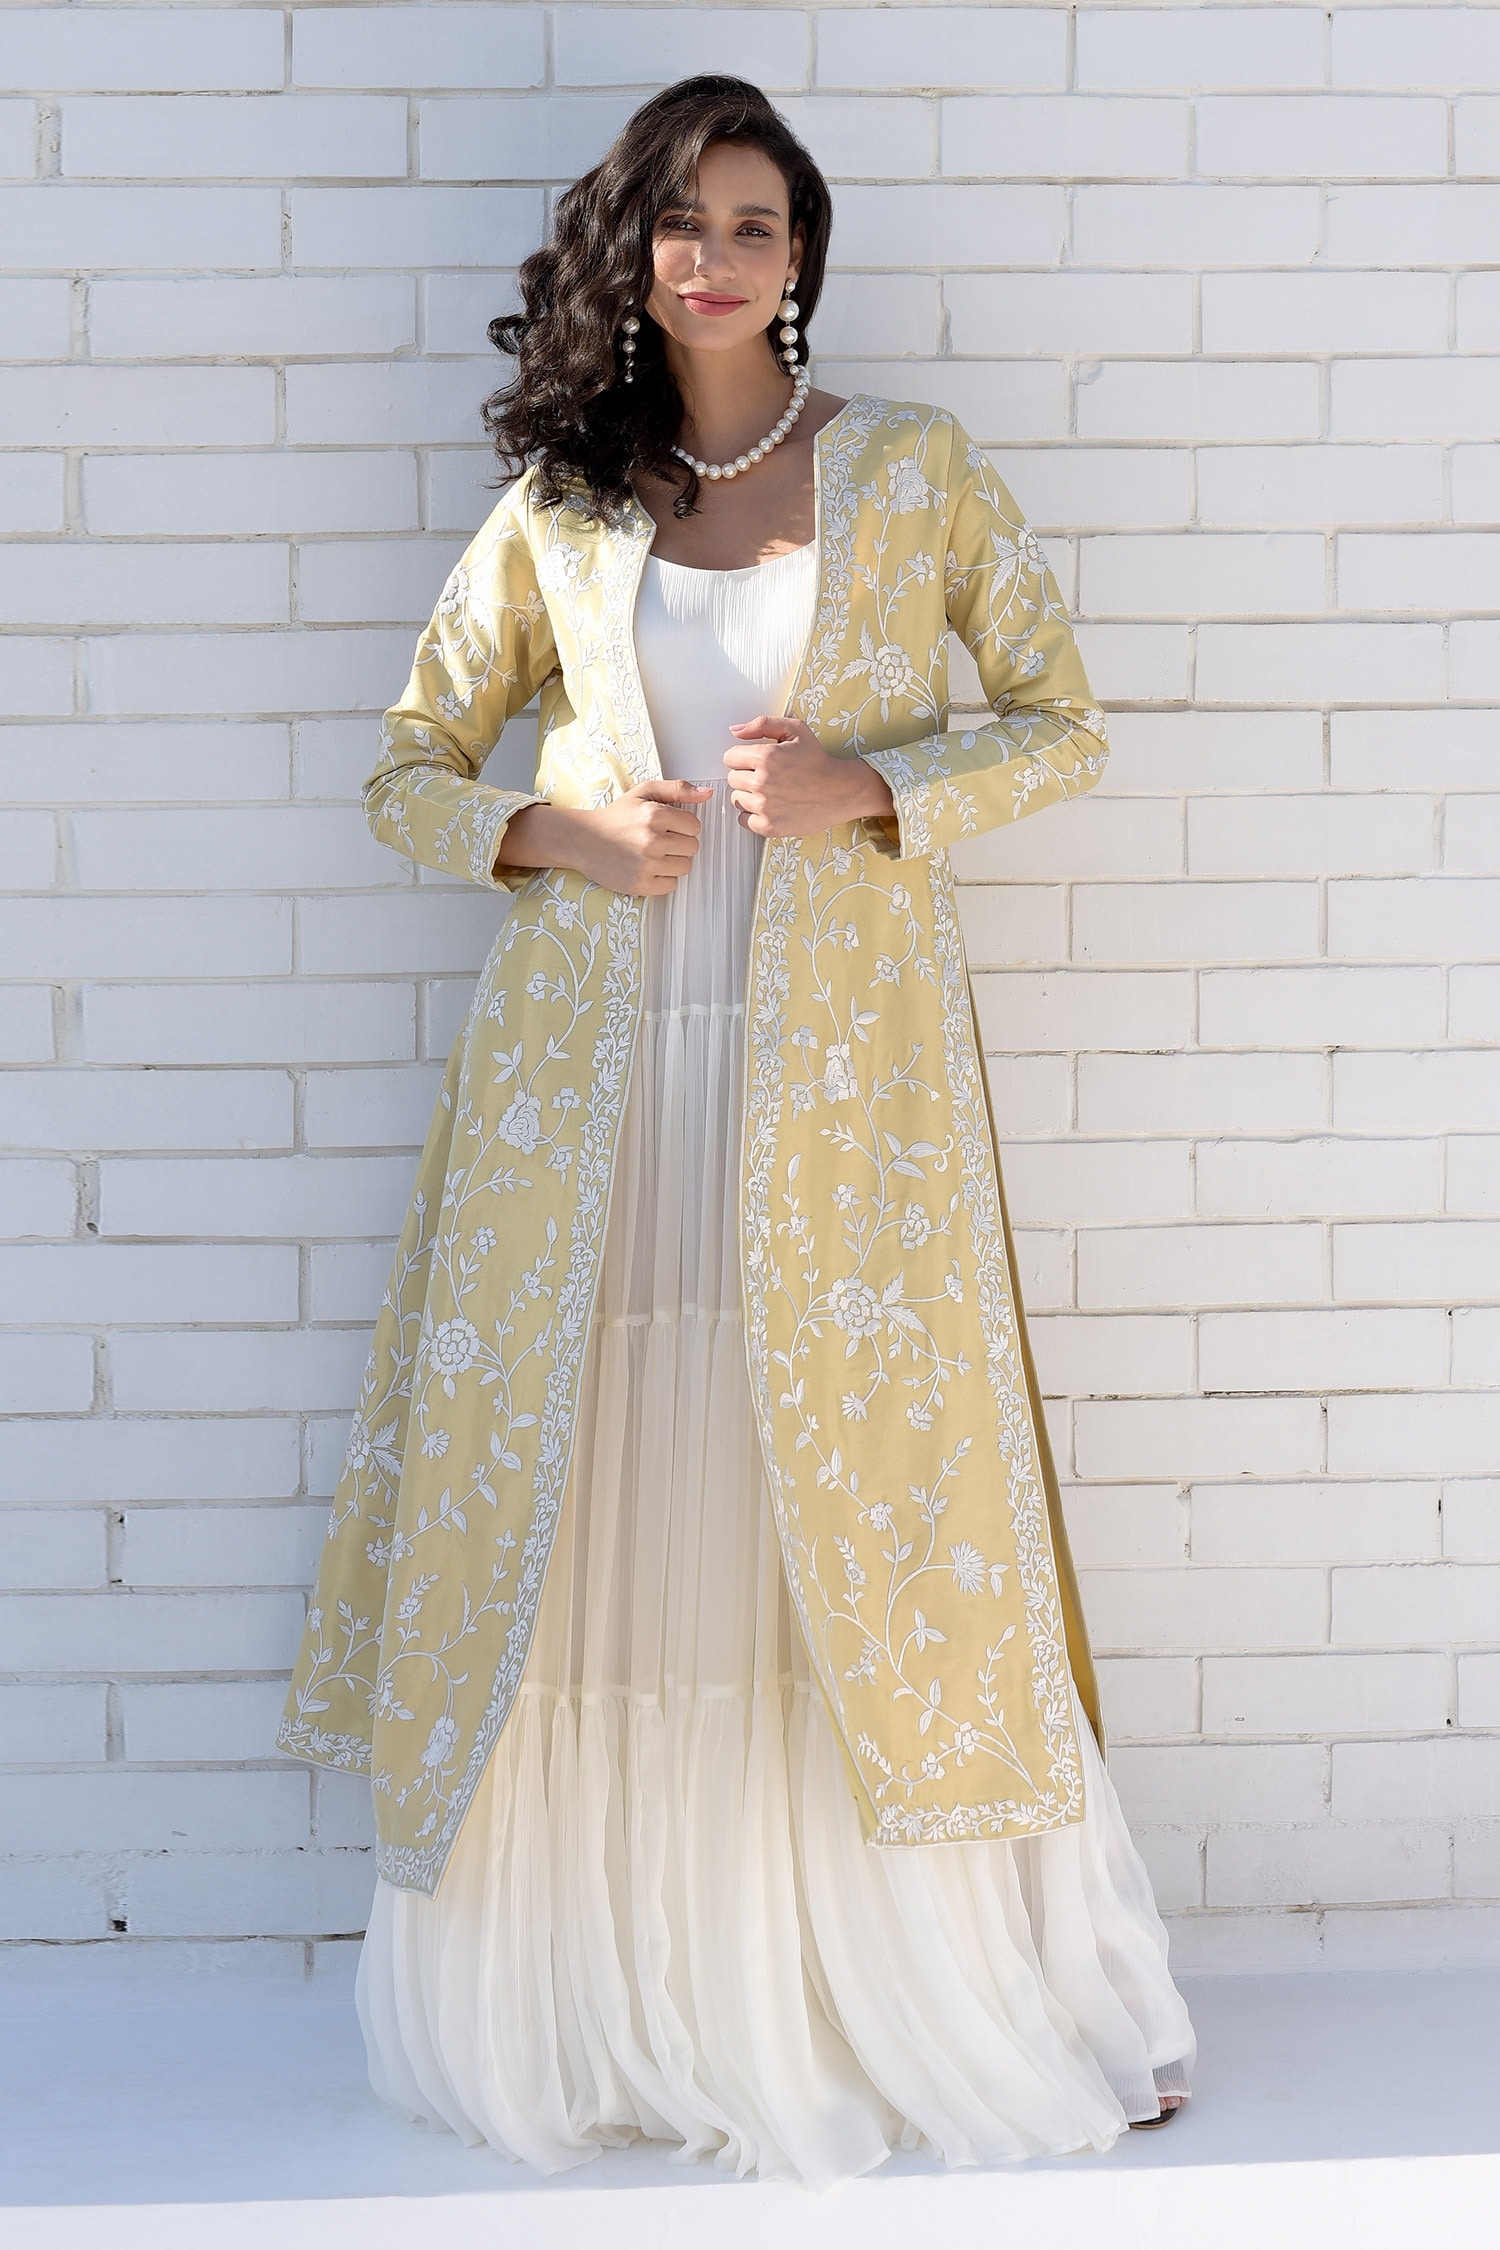 Ethnic Gowns | Heavy Golden Gown With Red Jacket | Freeup